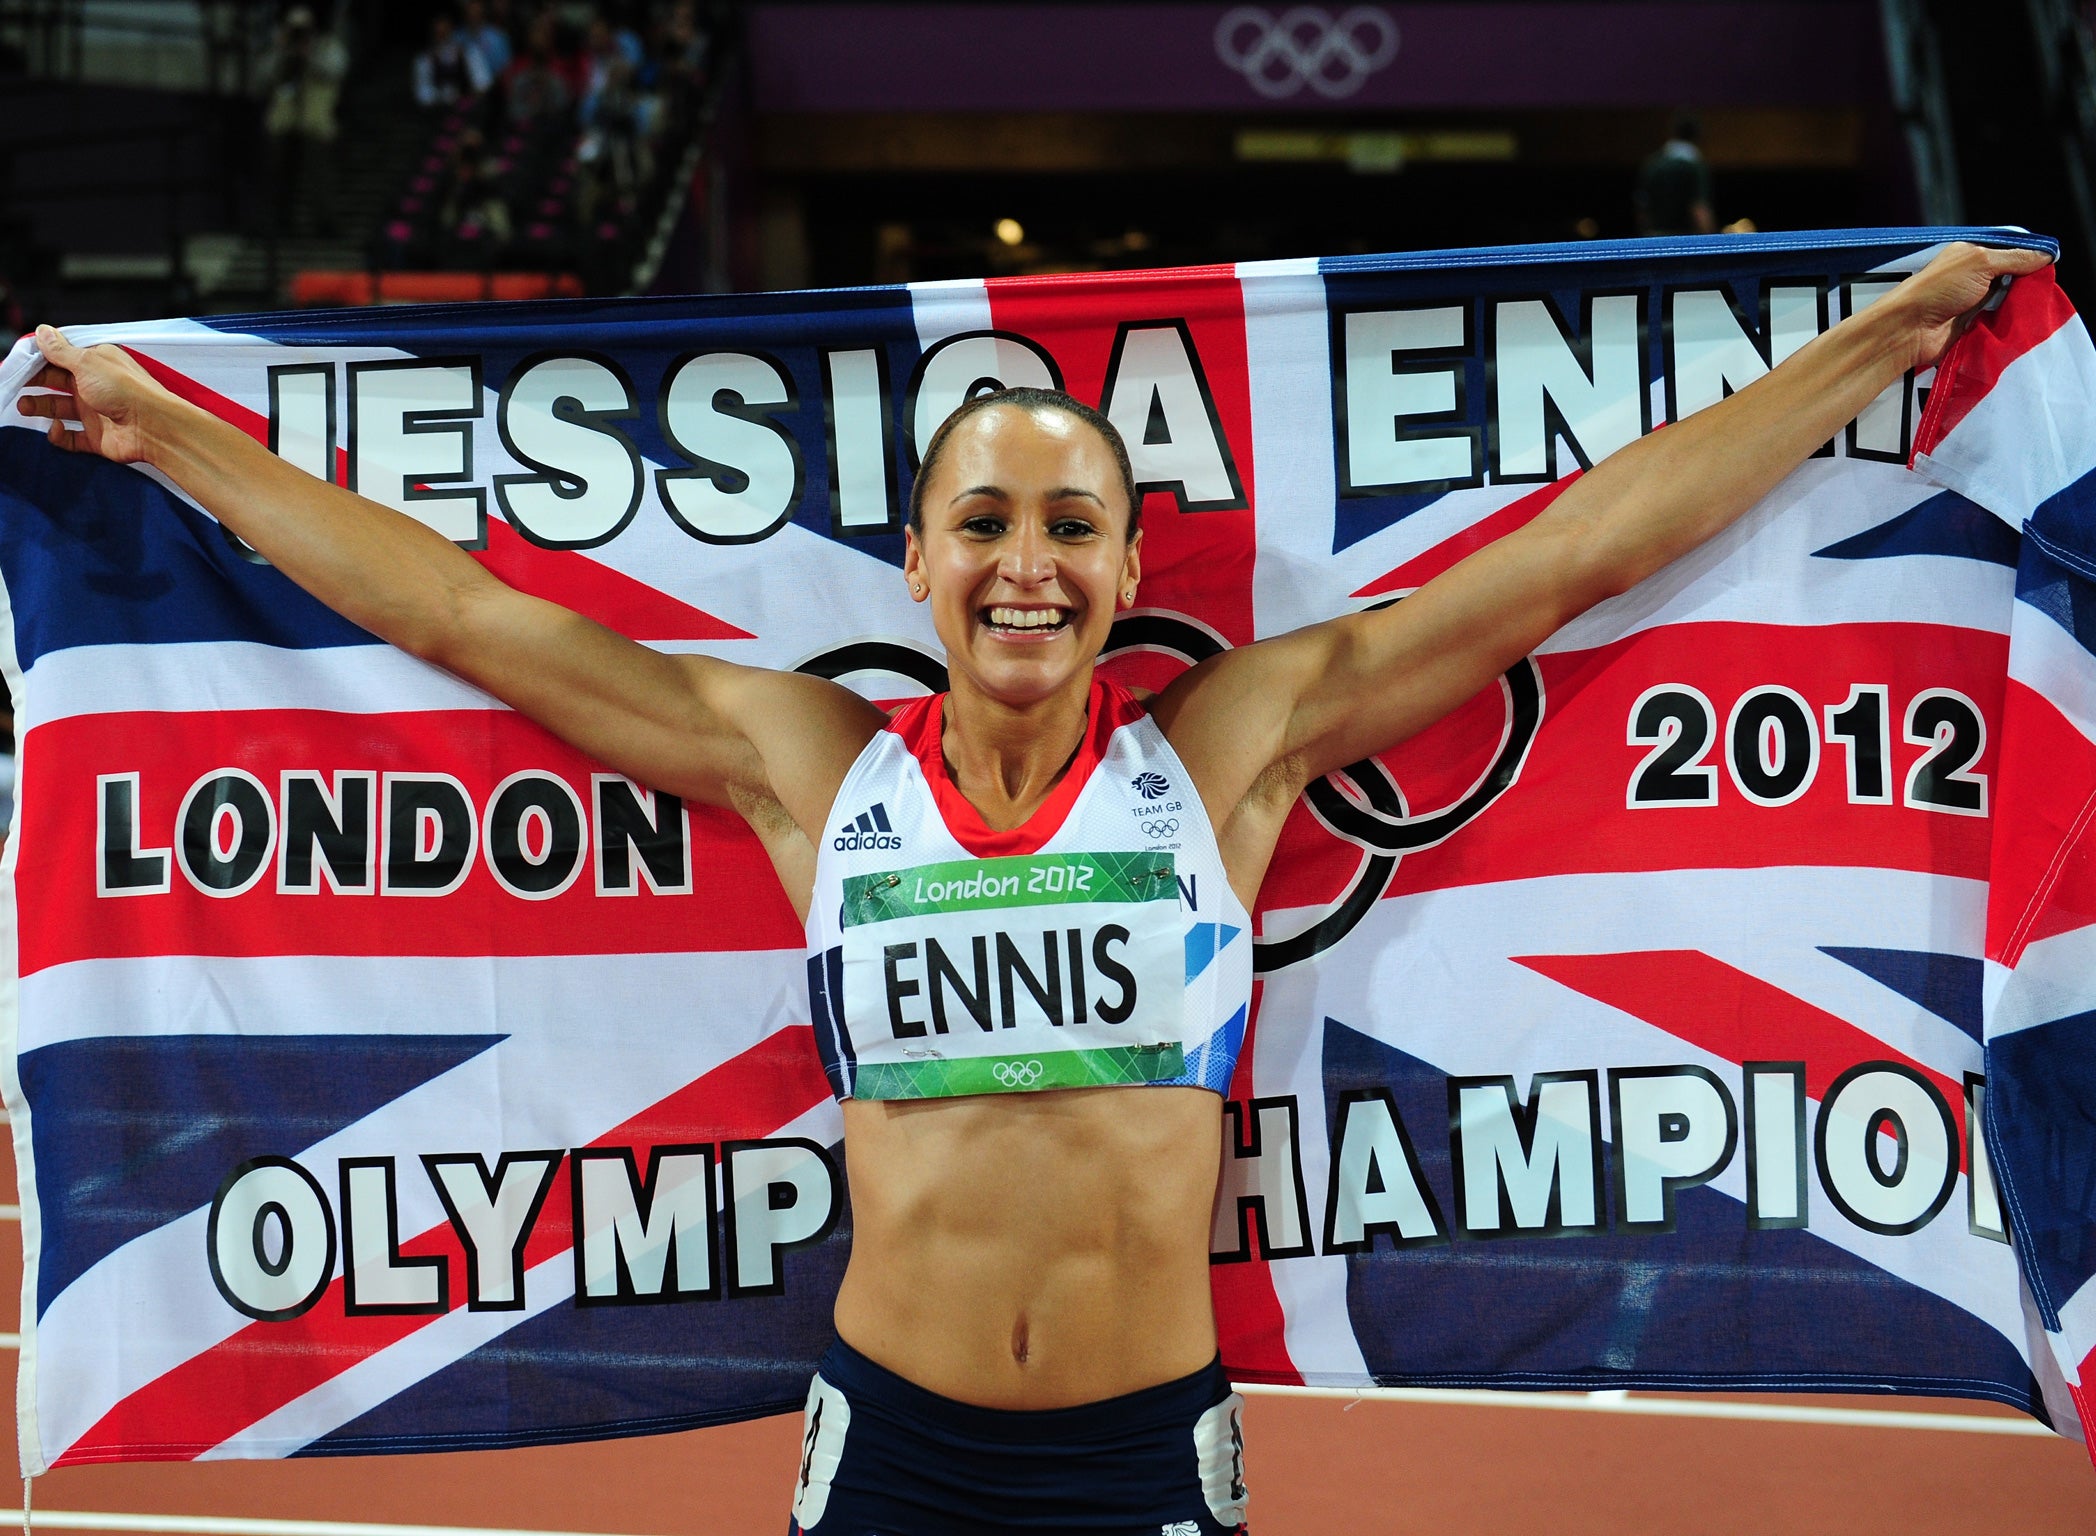 Jessica Ennis, 26, won gold in the heptathlon at the Olympics. Despite the pressure of being dubbed the face of London 2012, the Sheffield star won gold when she clocked a British points record of 6,955 and set the fastest-ever heptathlon time in the 100